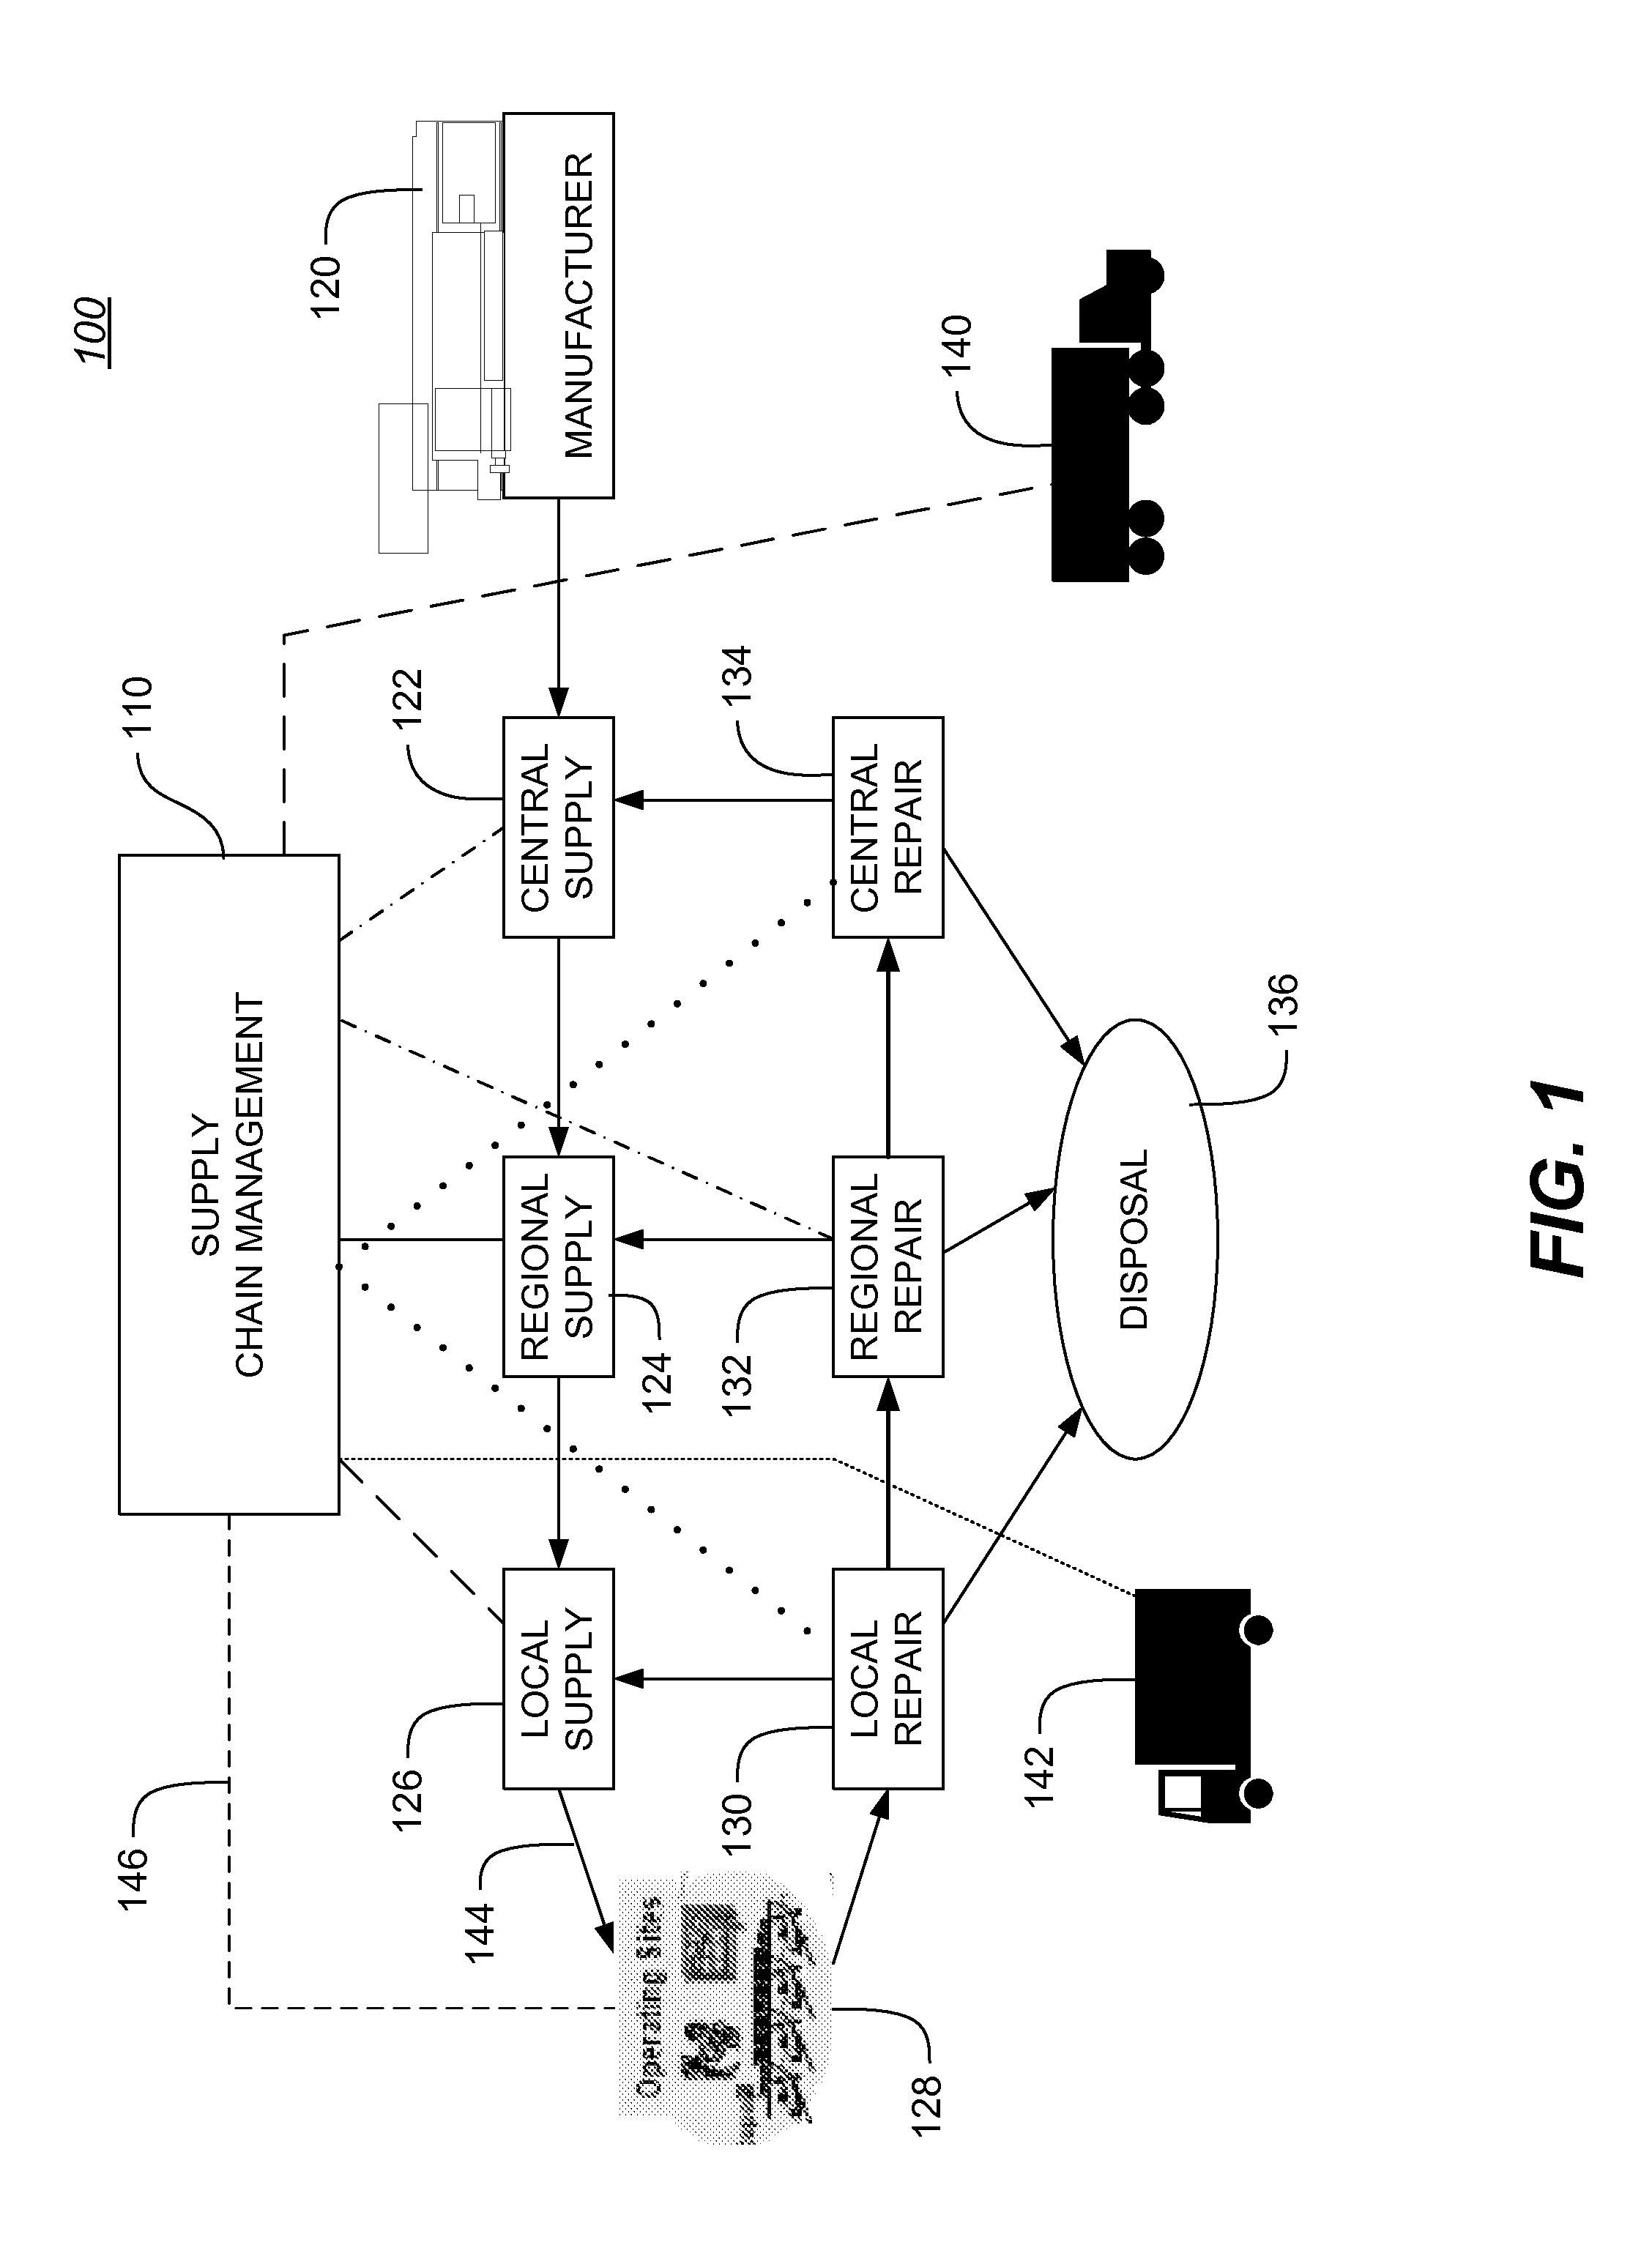 Systems, methods and apparatus for supply plan generation and optimization